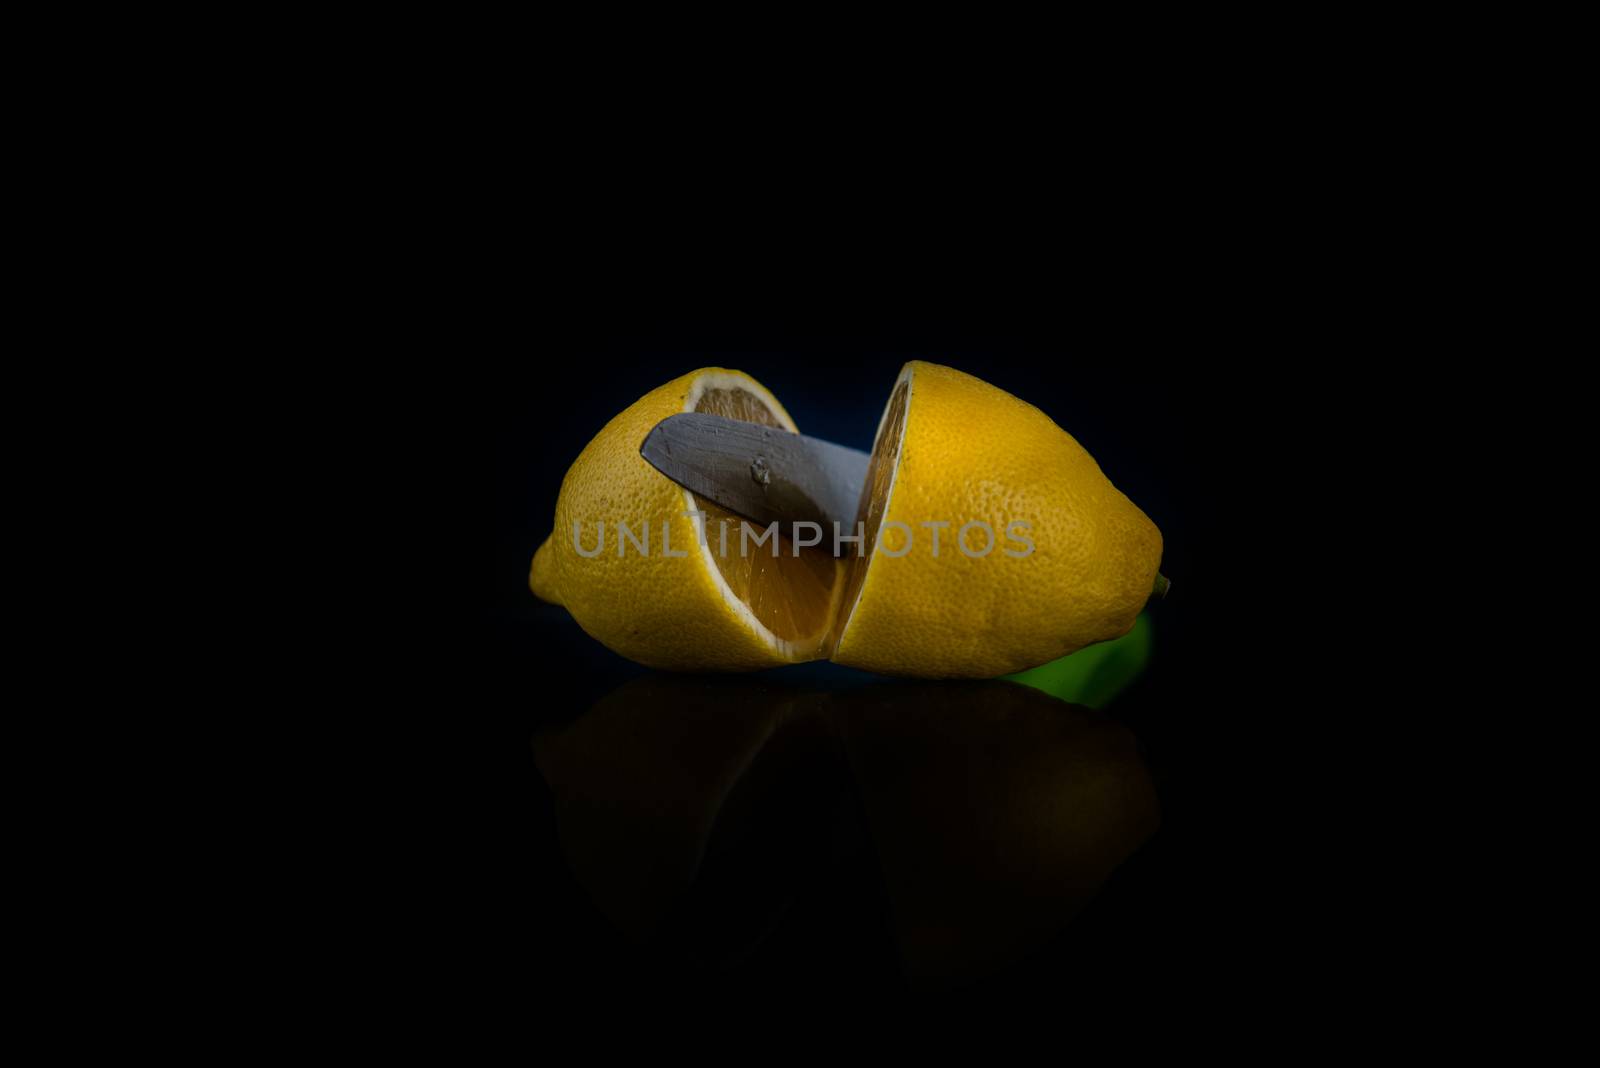 two halves of lemon cut with a knife on a black background with copy space